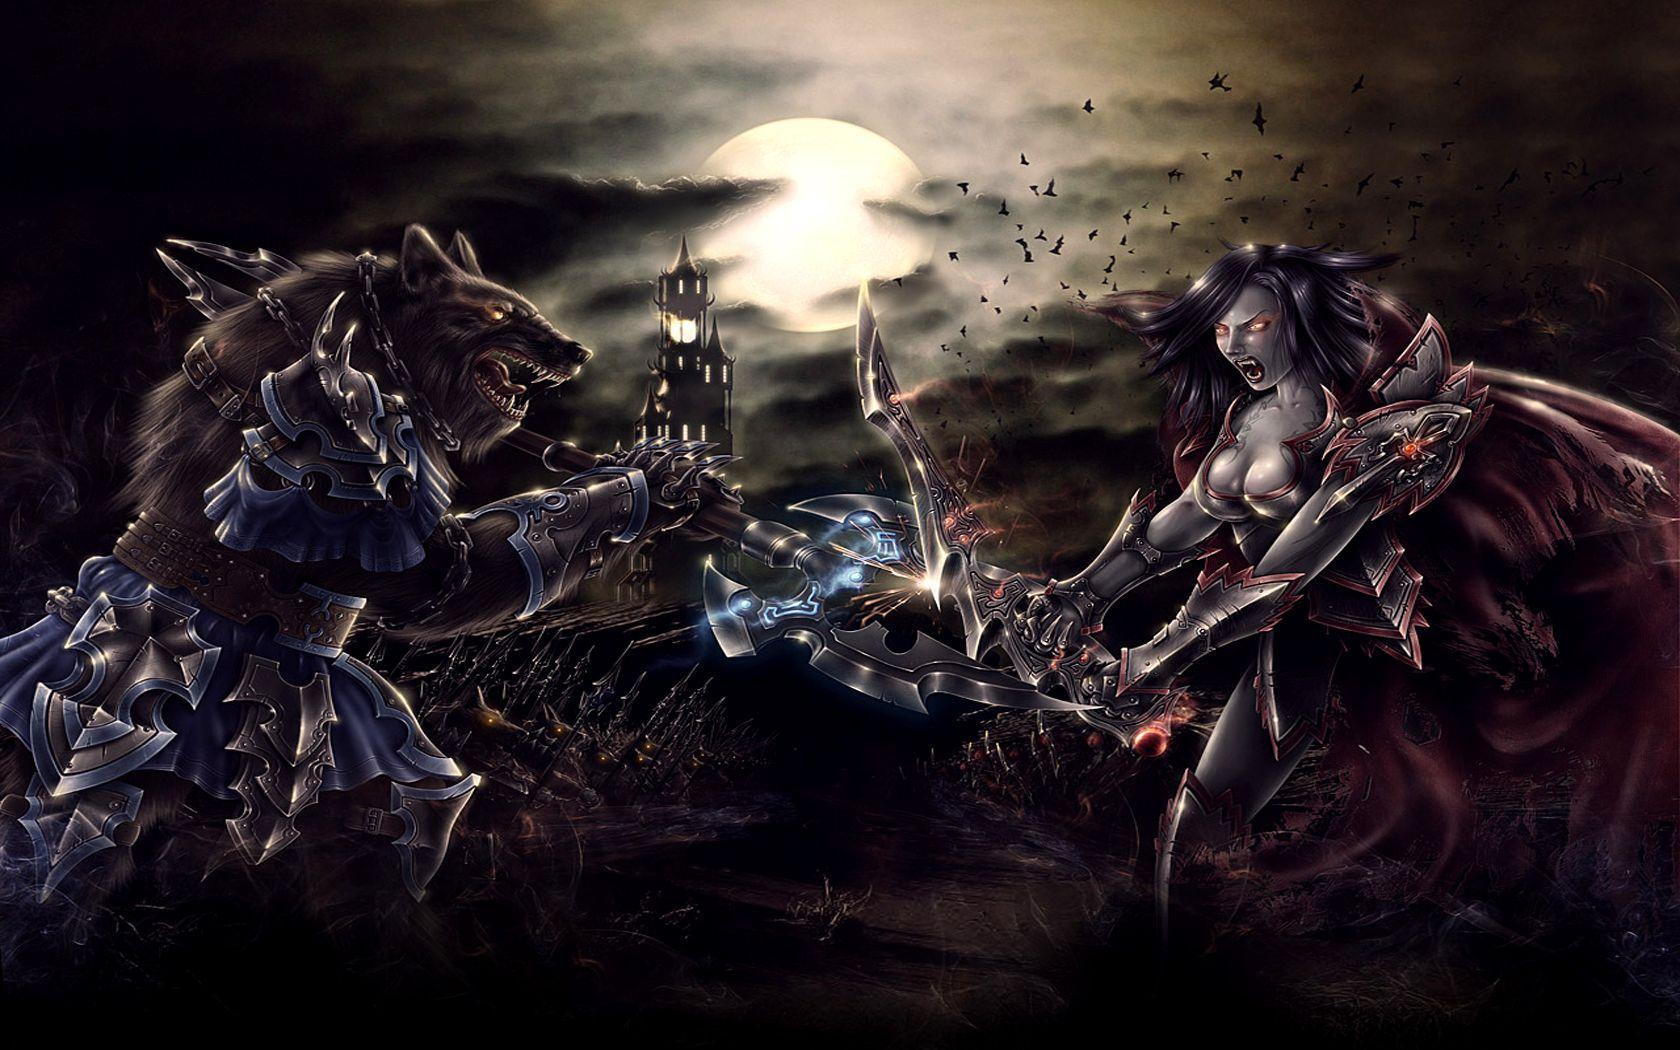 image For > Lycan Vs Werewolf